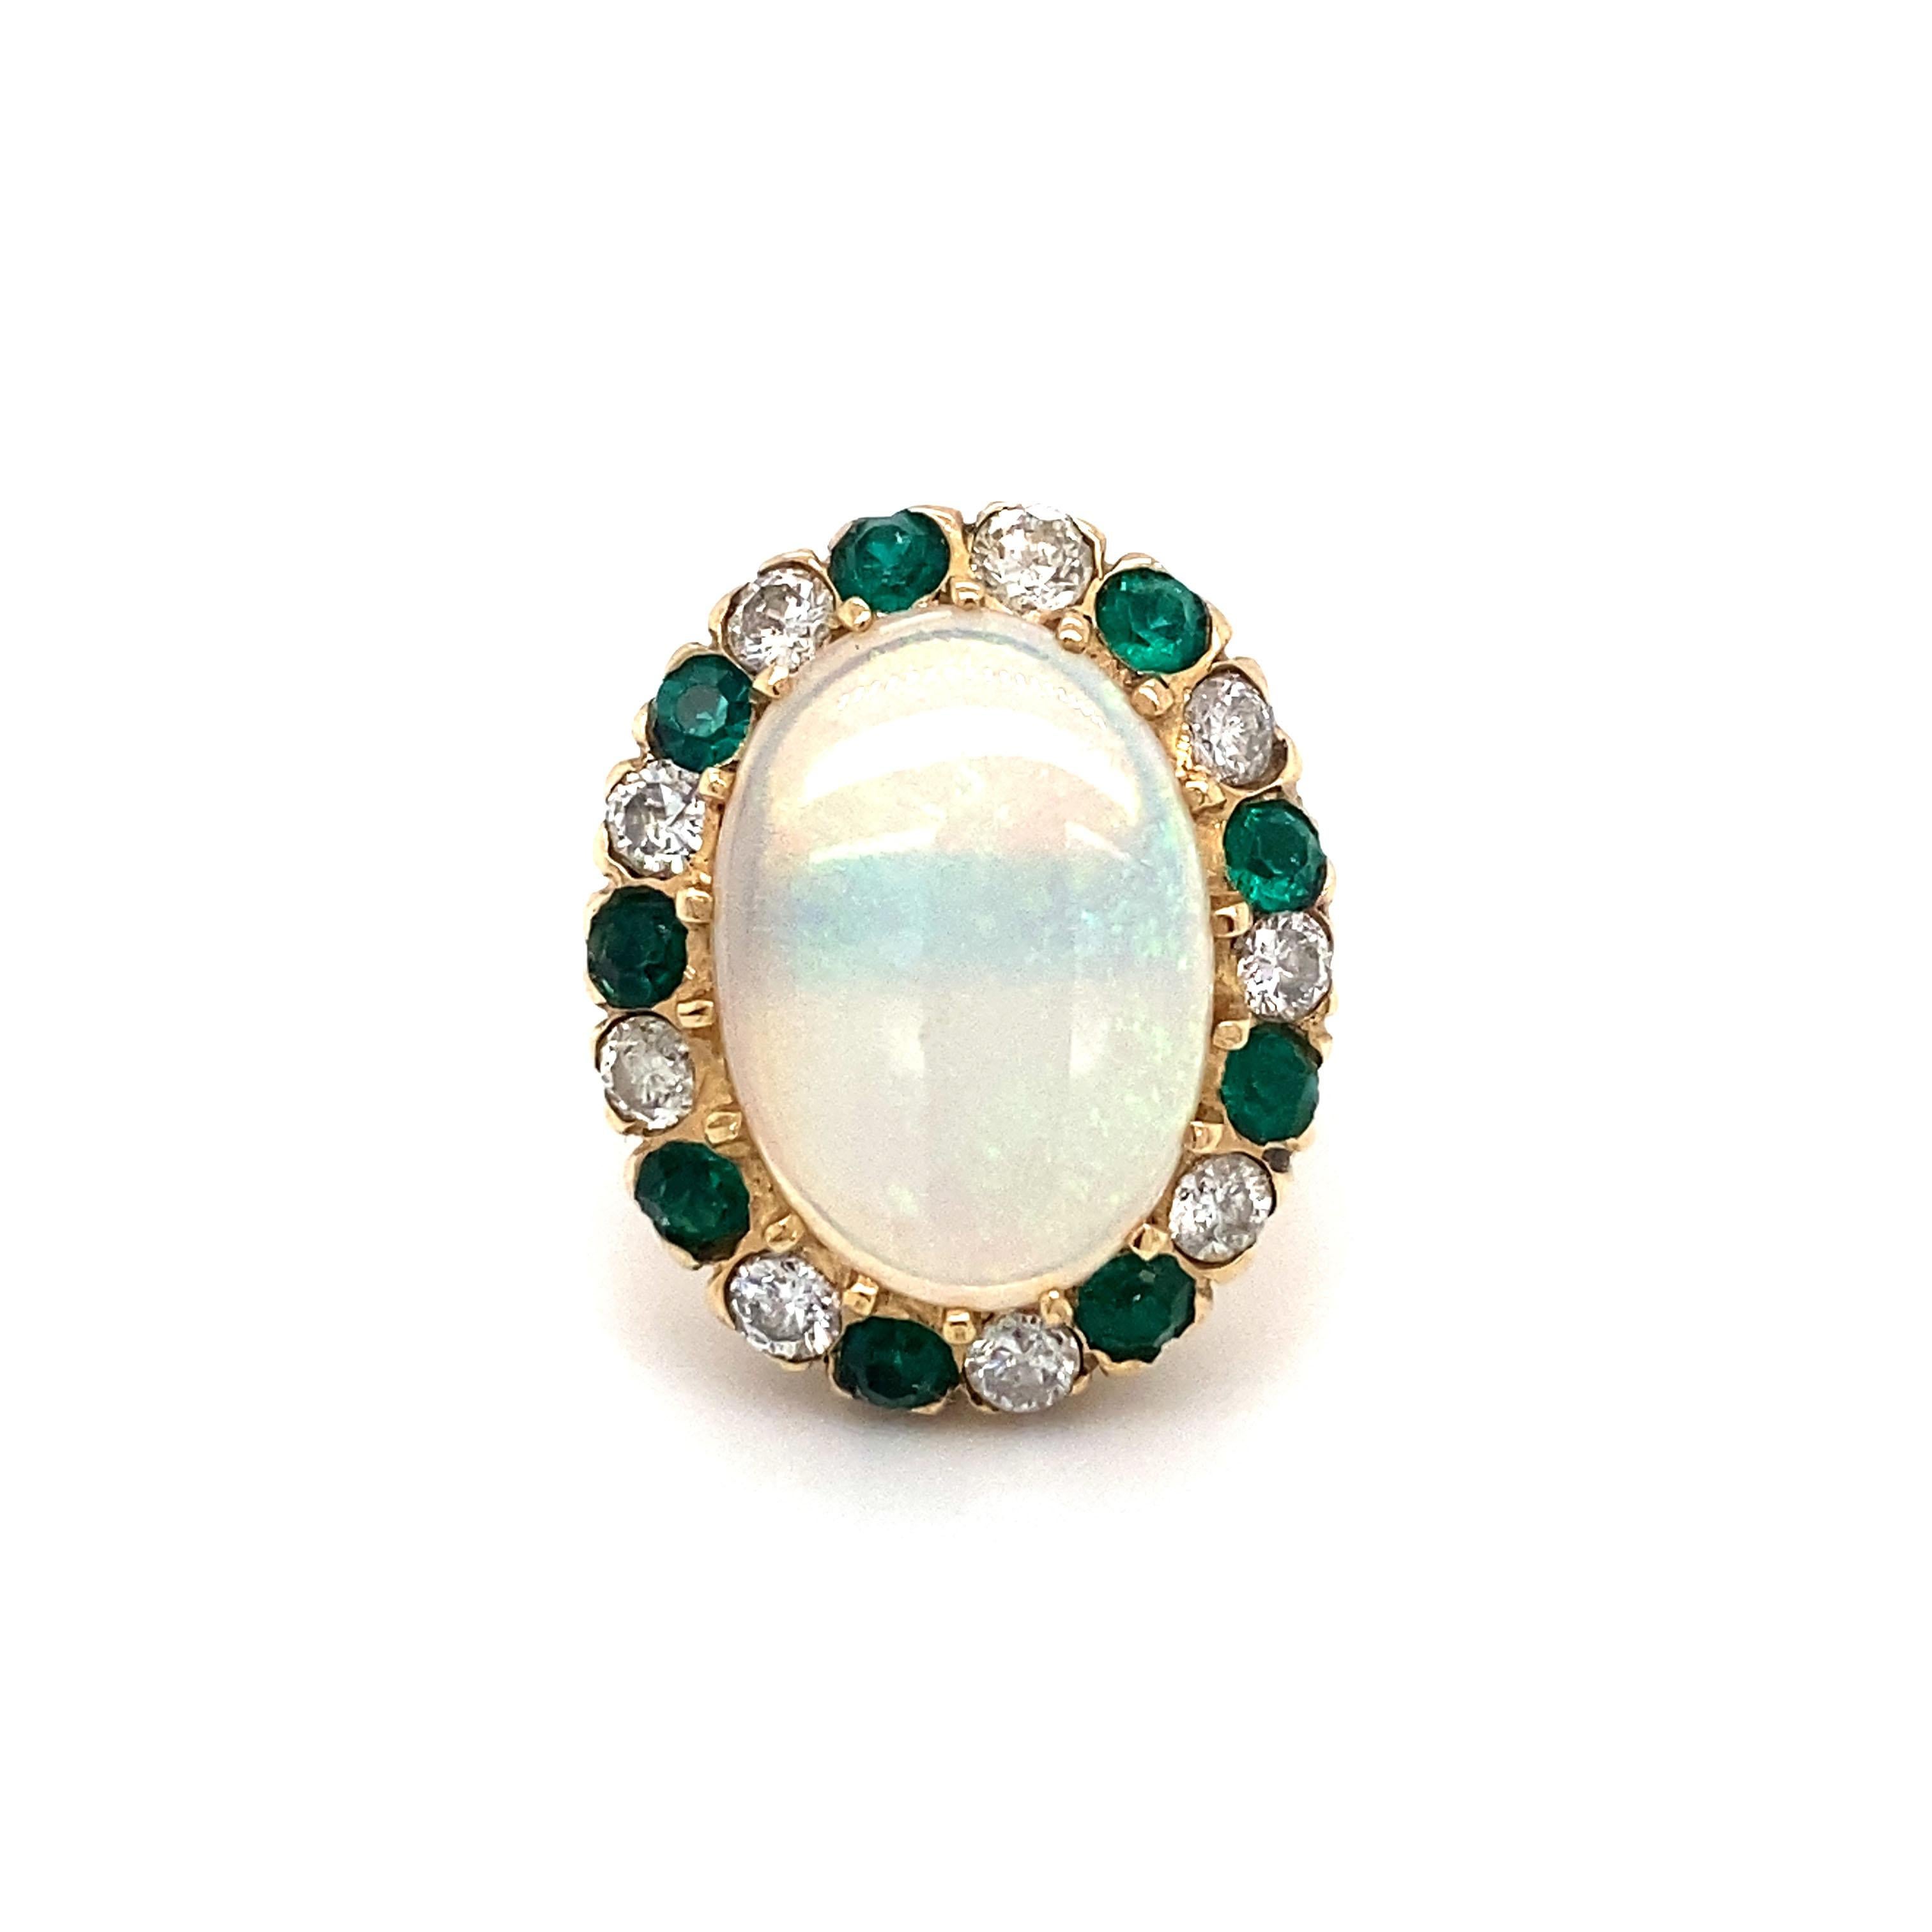 Art Deco Circa 1950s 4.0 Carat Opal, Diamond and Green Glass Halo Ring in 14K Gold For Sale